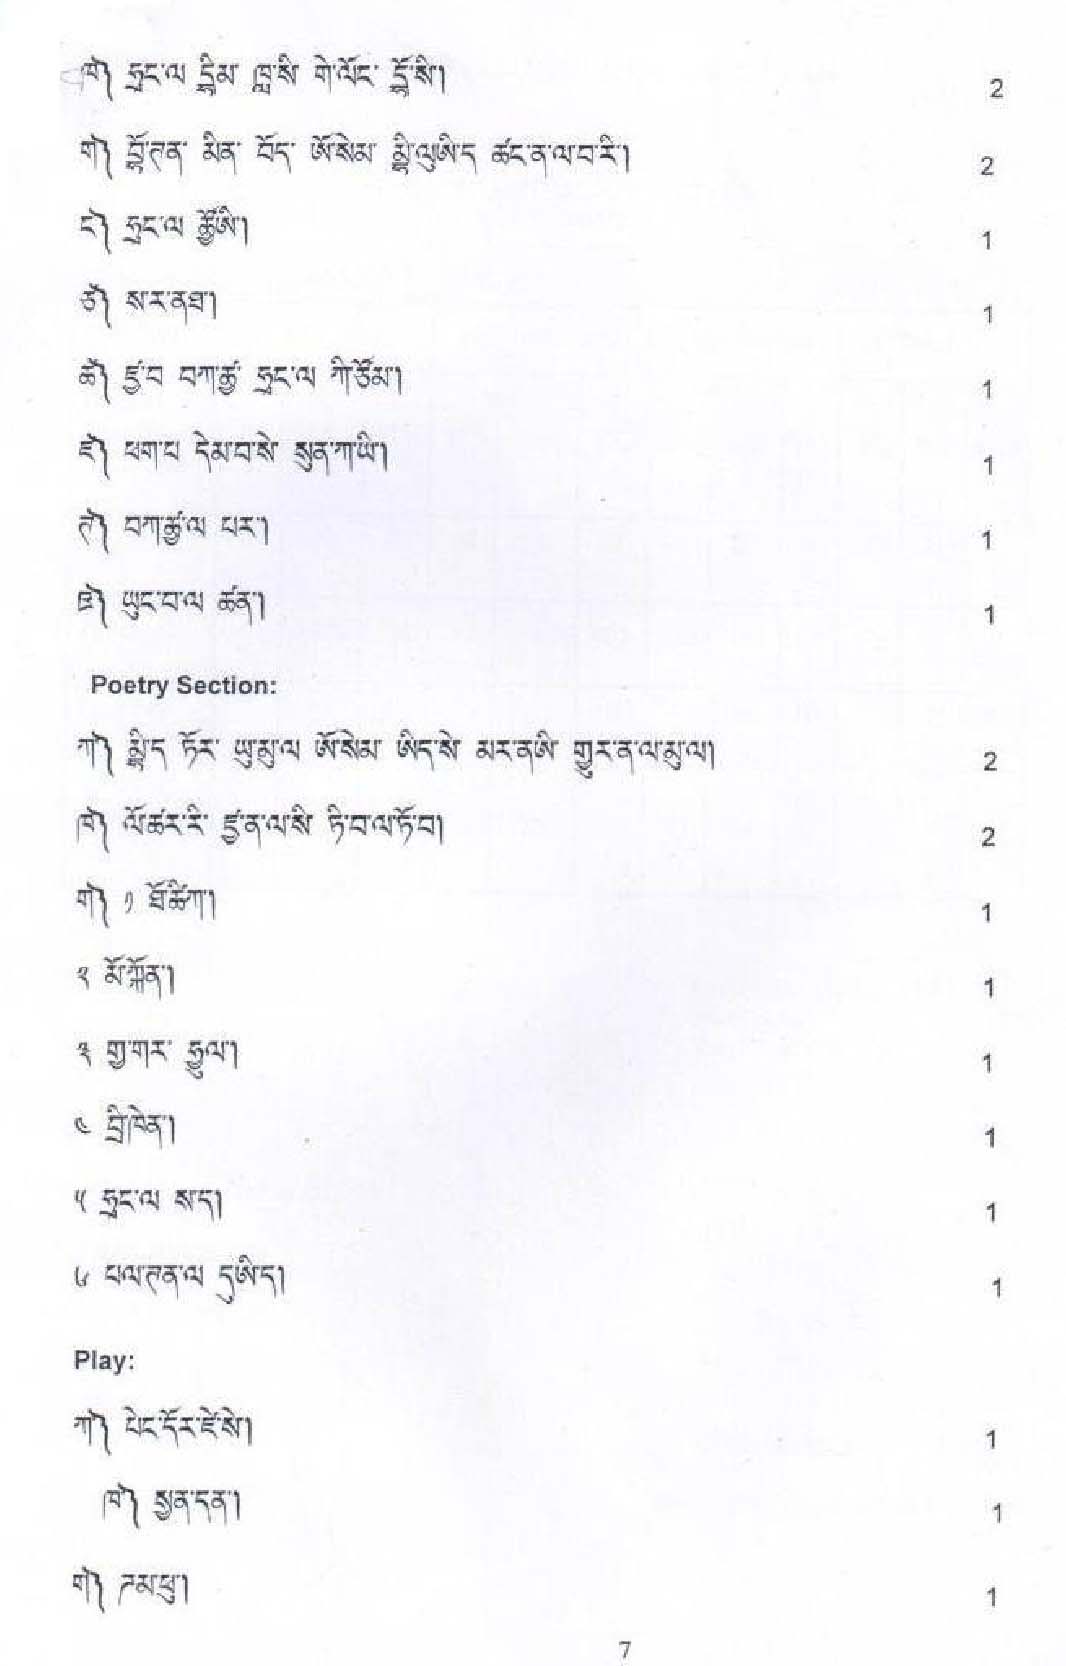 Tamang CBSE Class X Sample Question Paper 2018-19 - Image 7